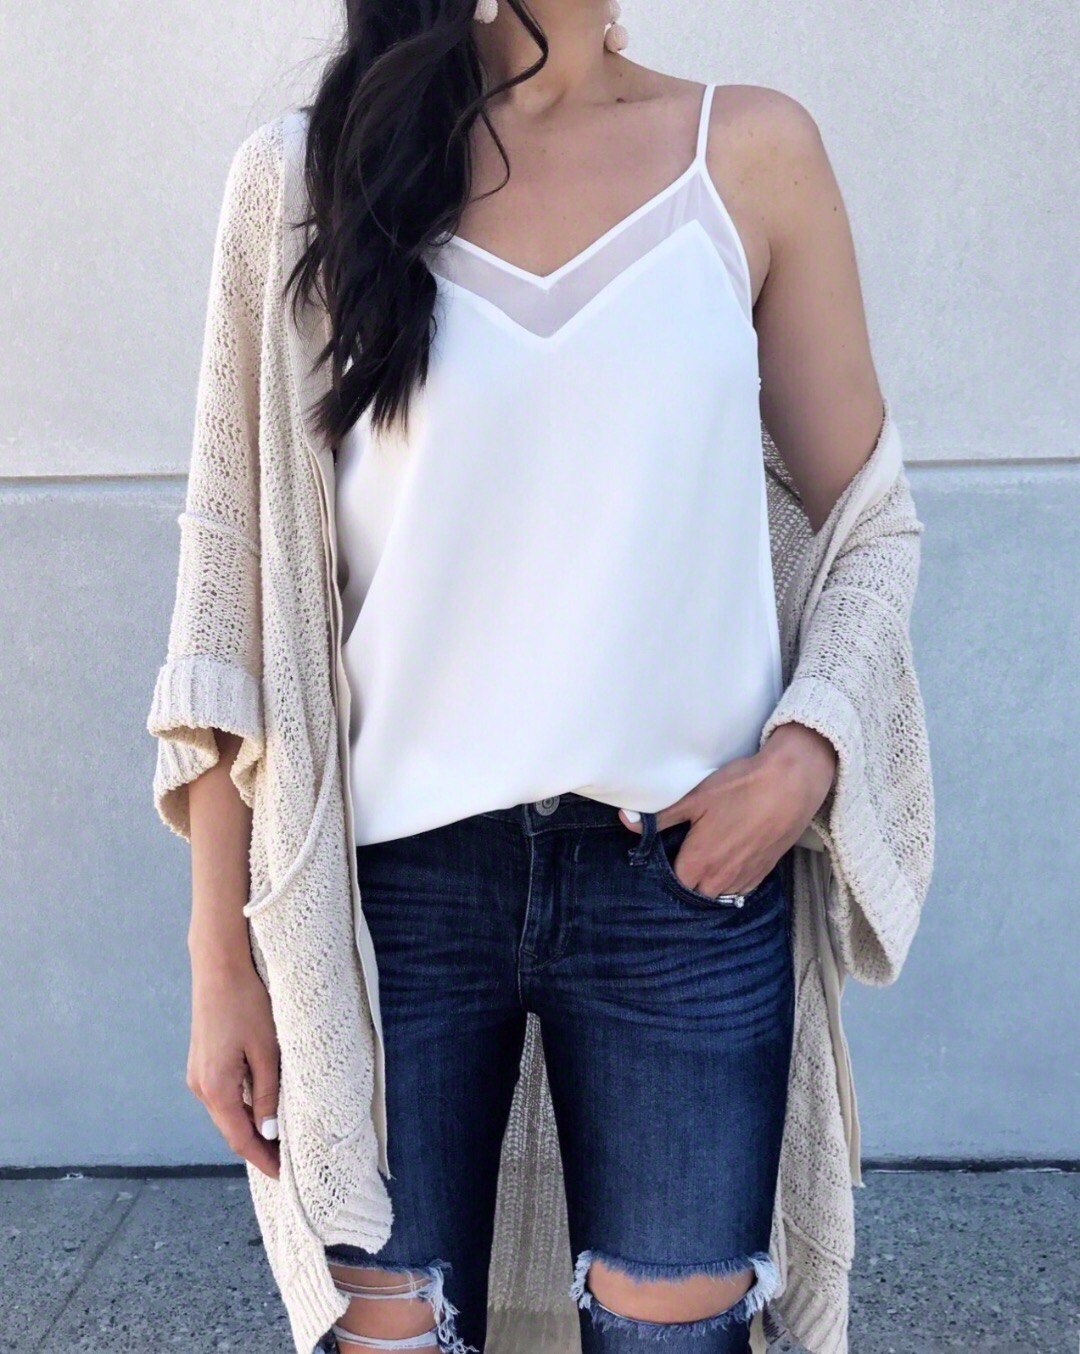 chiffon camisole, cute casual outfit, white camisole outfit with cardigan